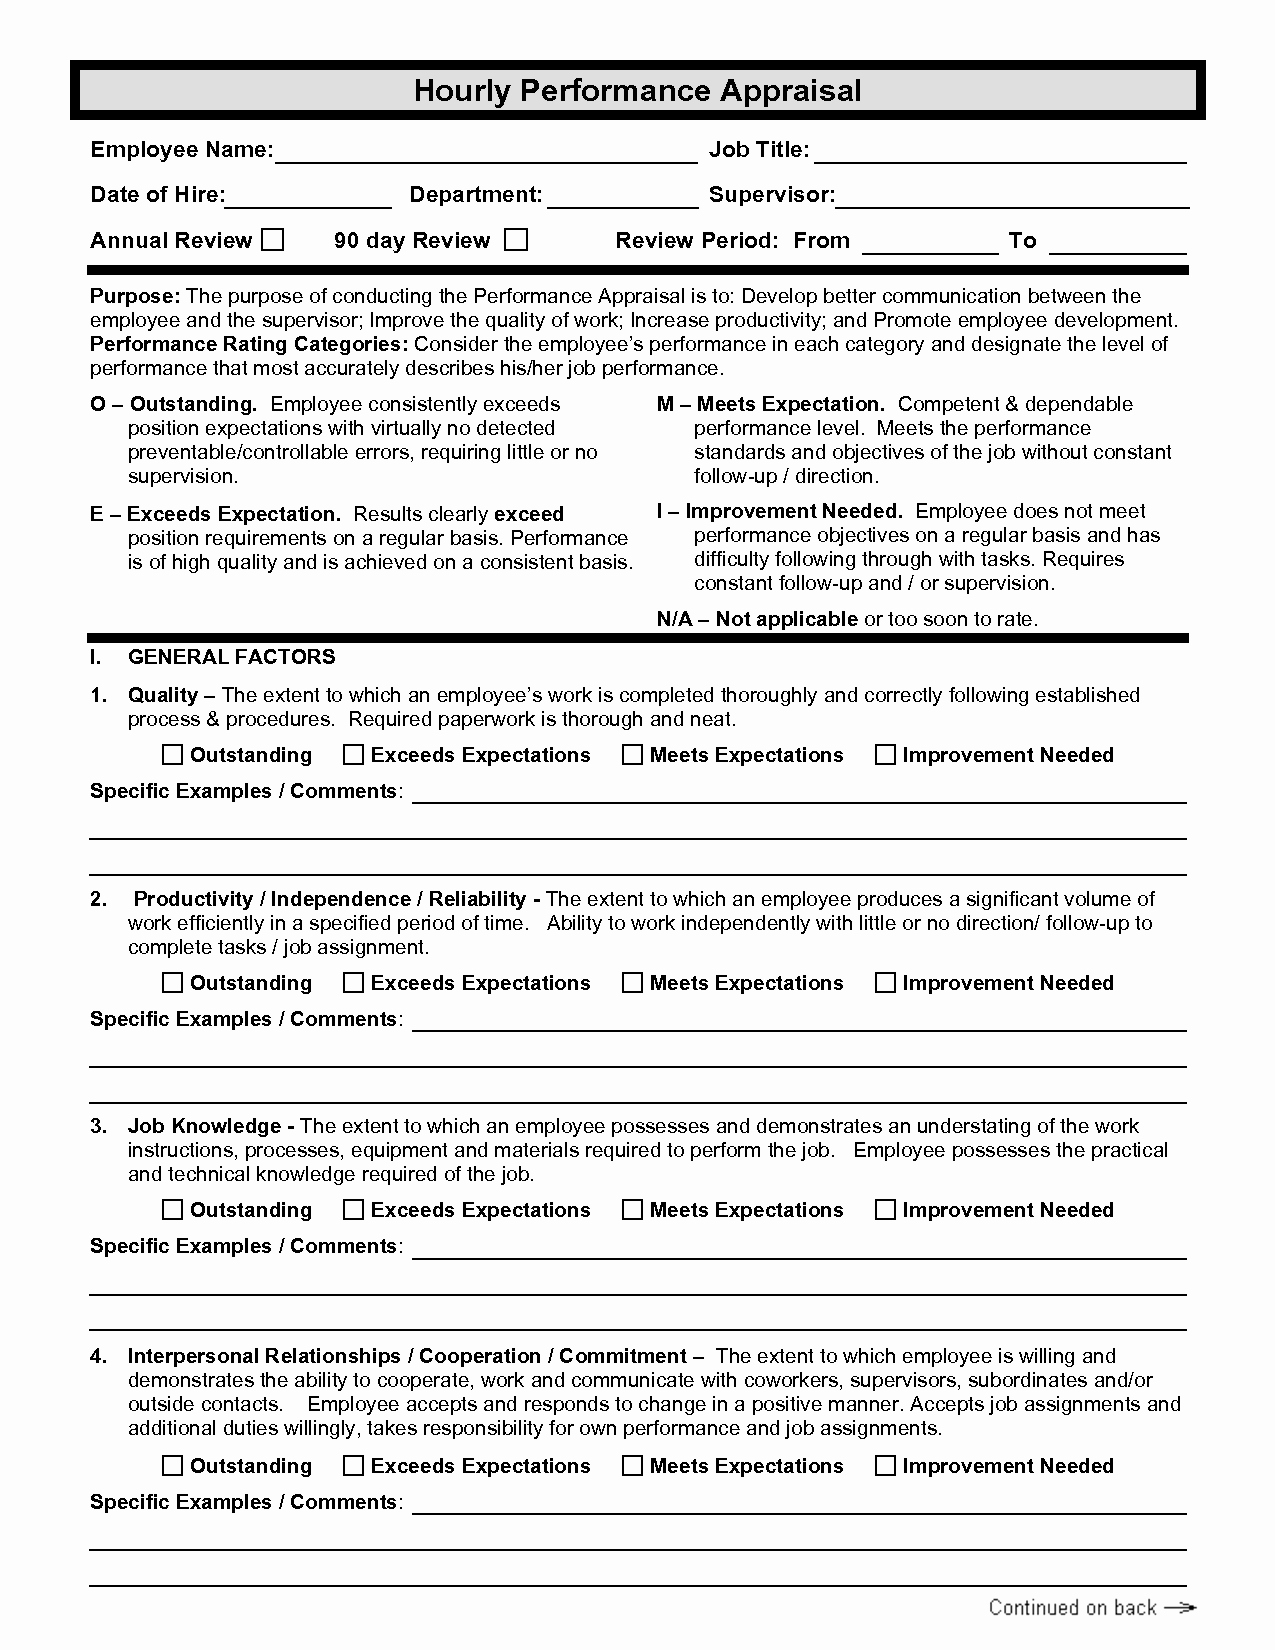 Employee Evaluation form Template Beautiful Employee Performance Evaluation form Free Download